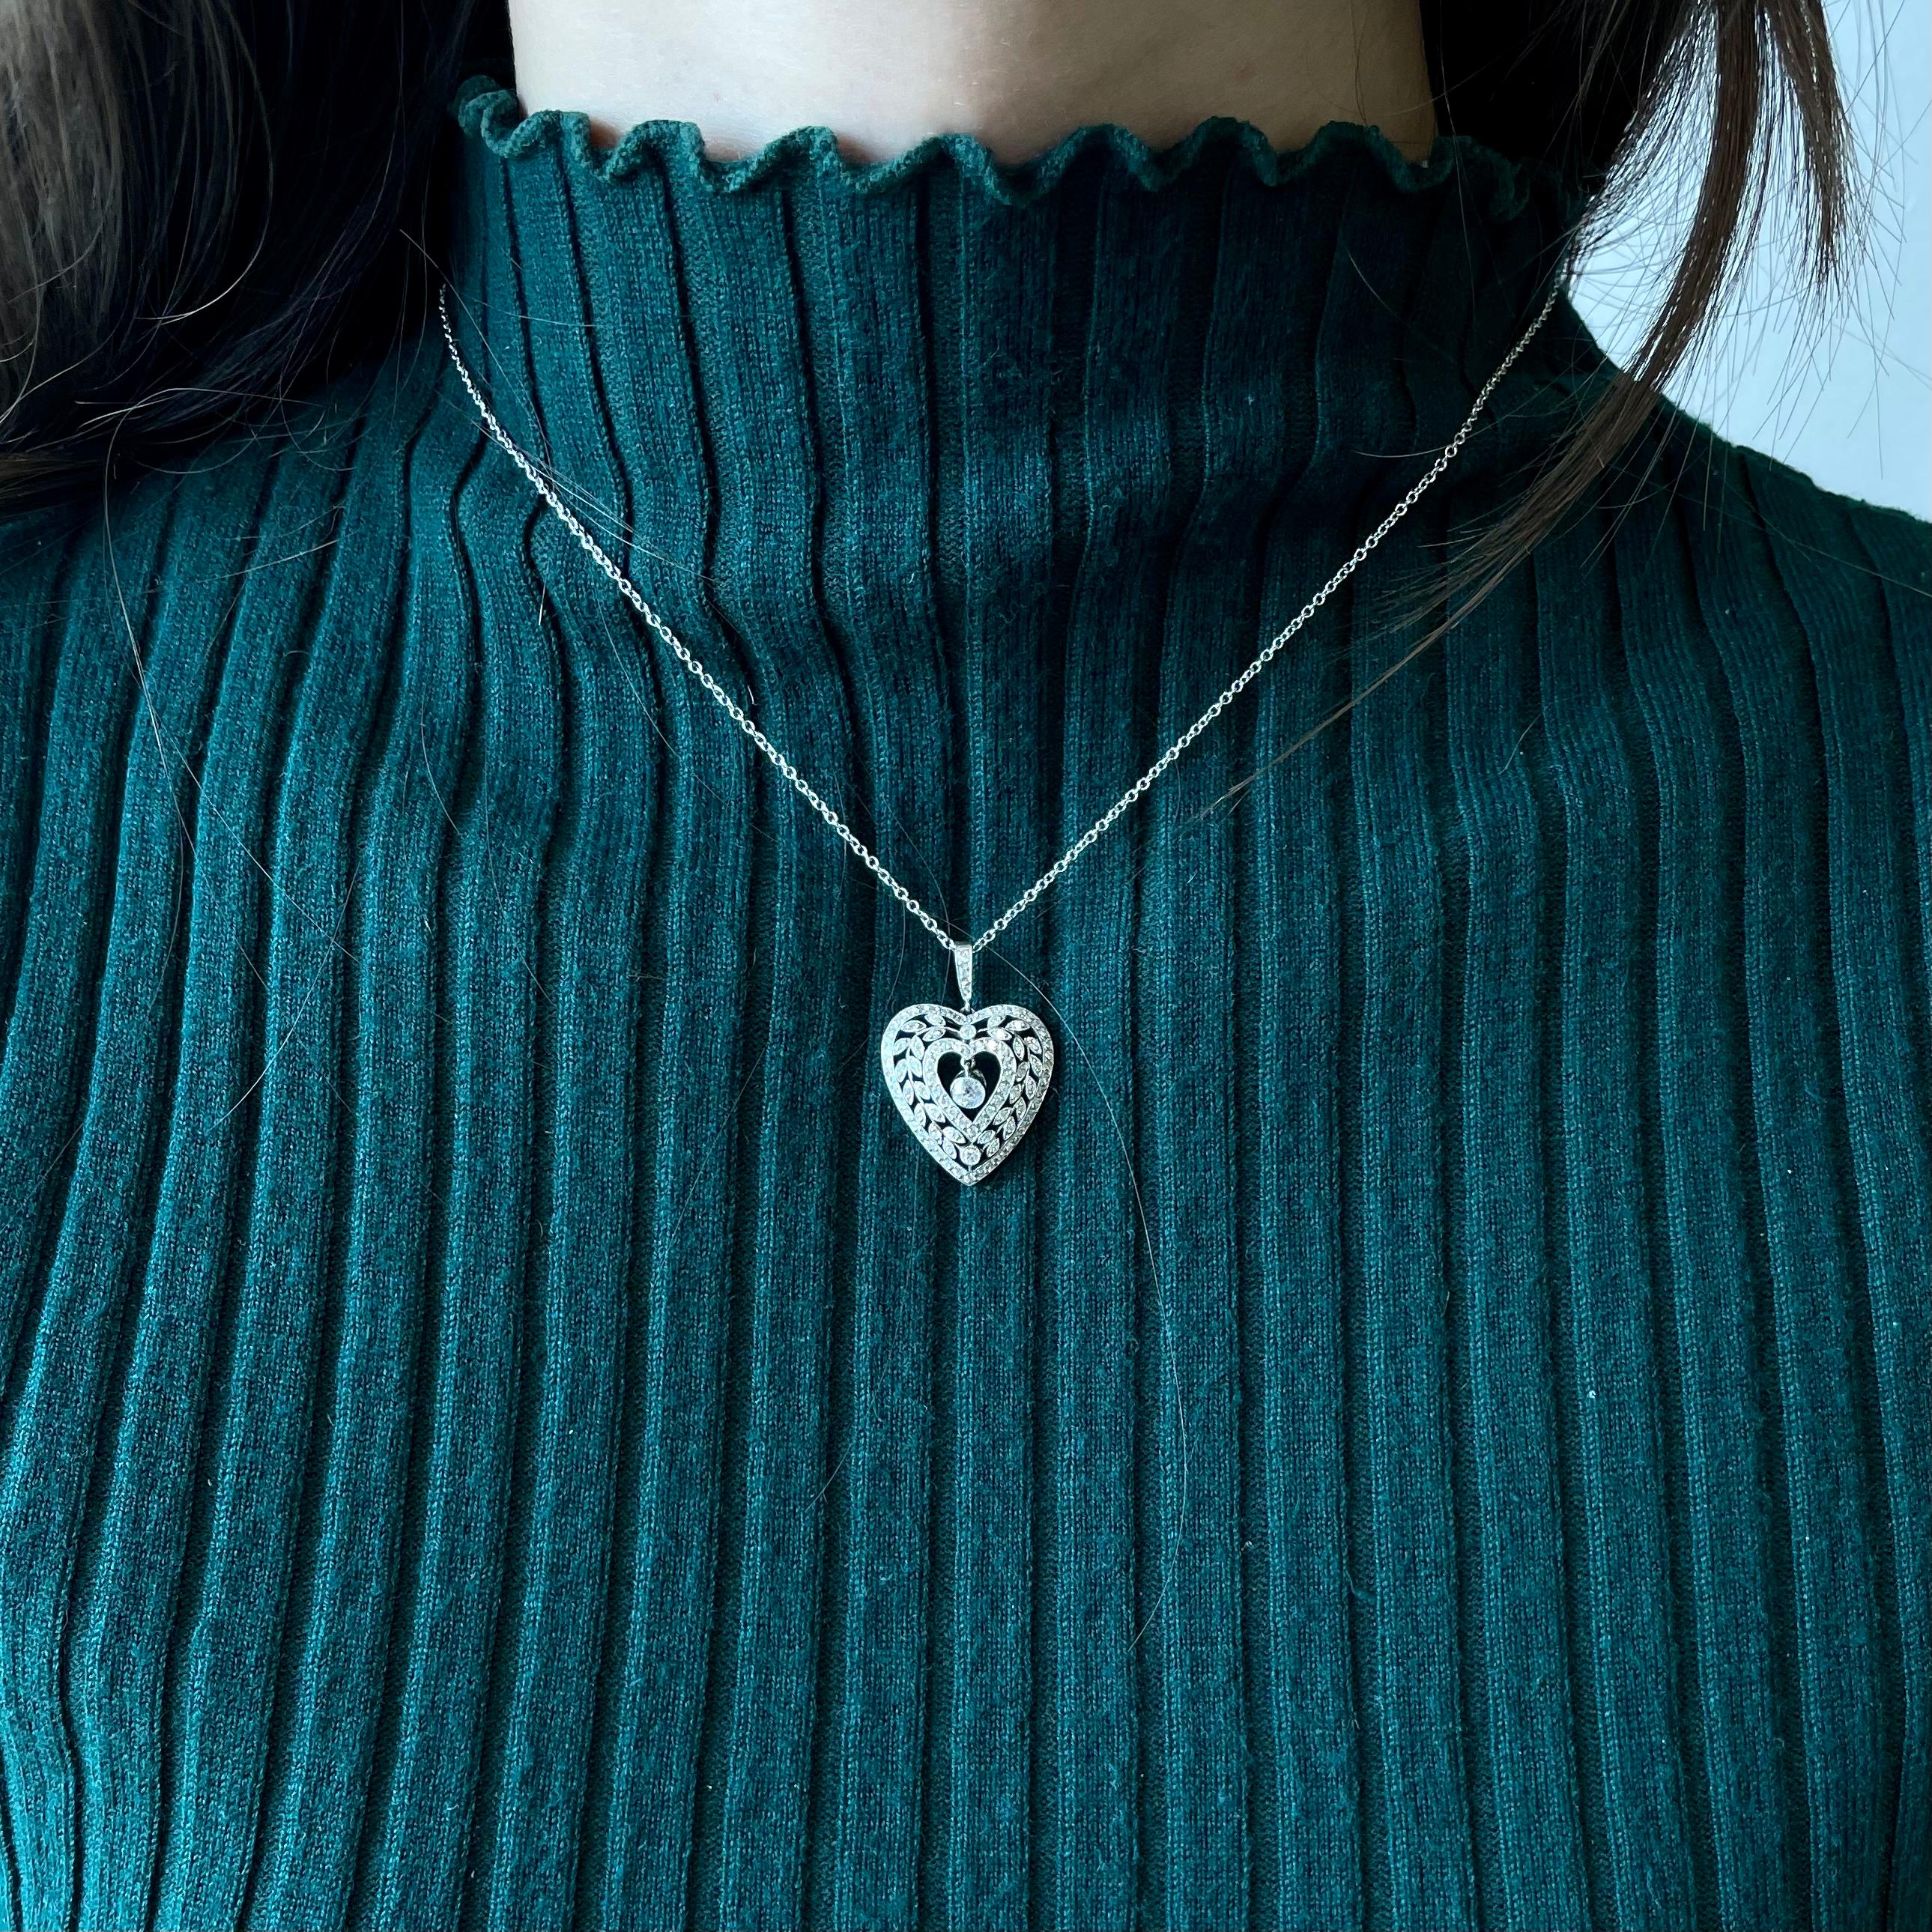 Antique Diamond Platinum Heart Pendant. The pendant features an Old European Cut diamond, approximately 0.20 carat, G color, SI clarity. Accented by 96 Round Brilliant Cut diamonds approximately 1.00 carat. Modern chain. Circa 1910's. 16